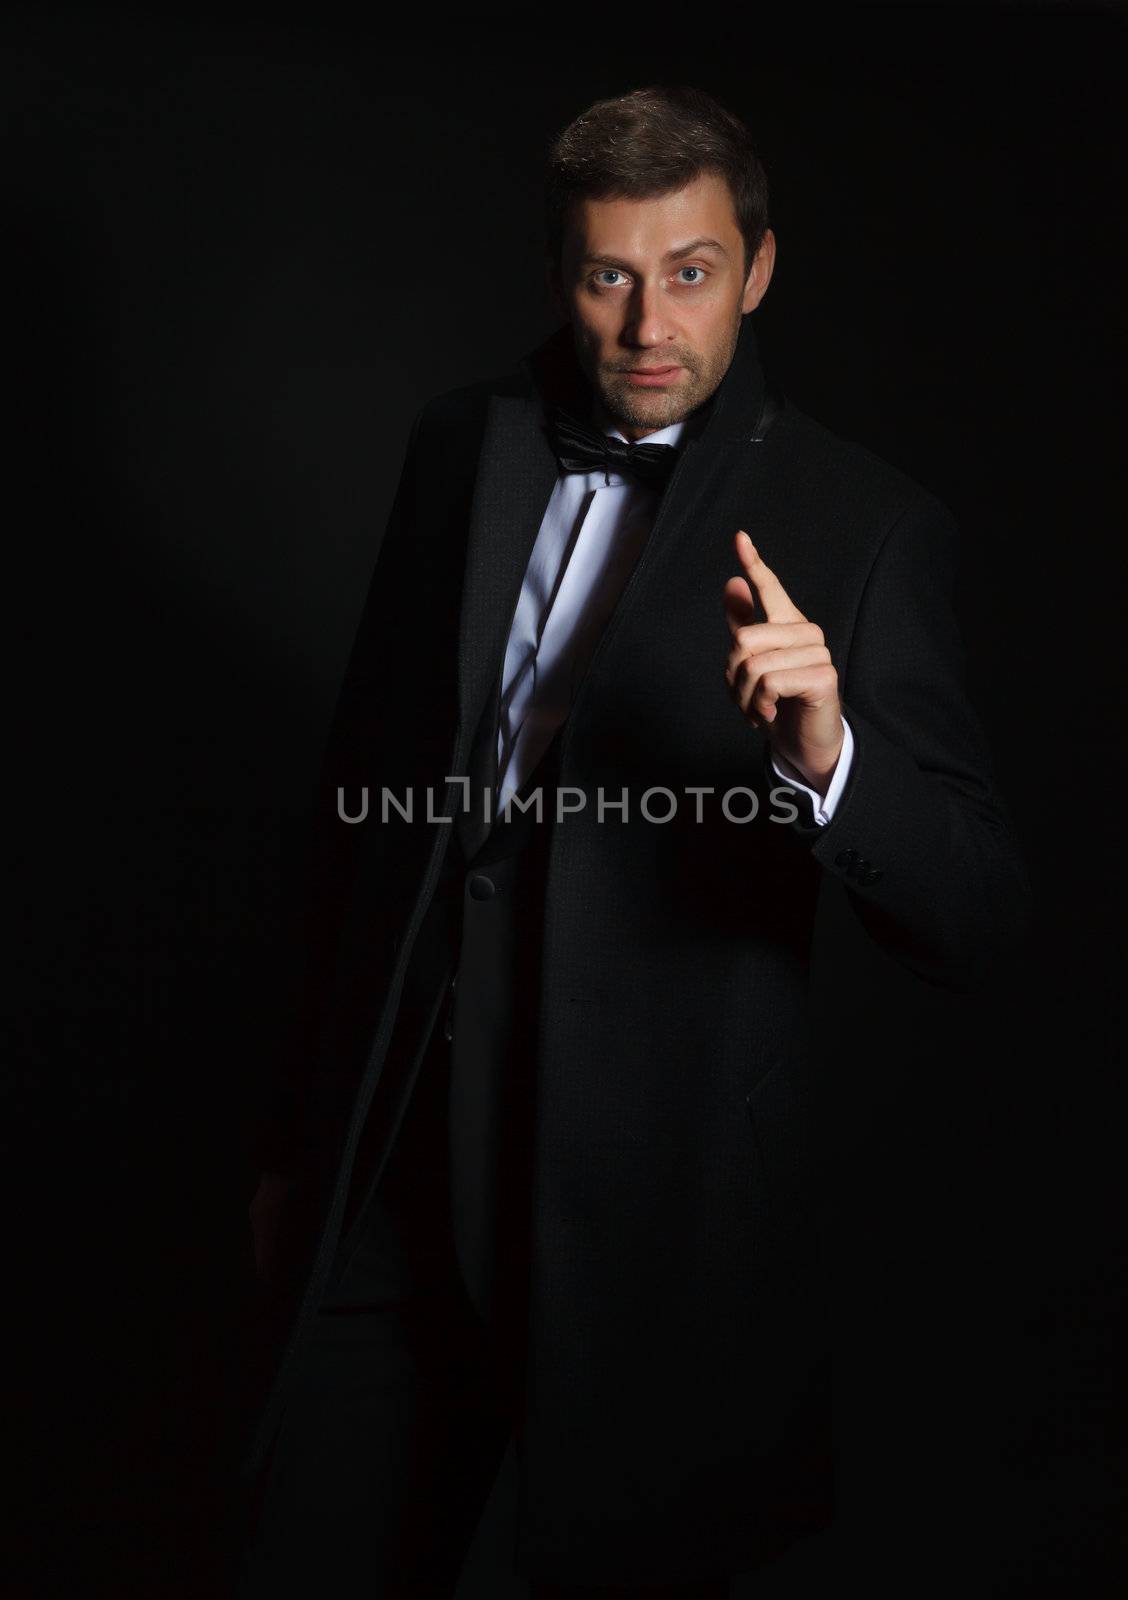 Dramatic portrait of a suave handsome man in a tuxedo and bowtie highlighted in darkness